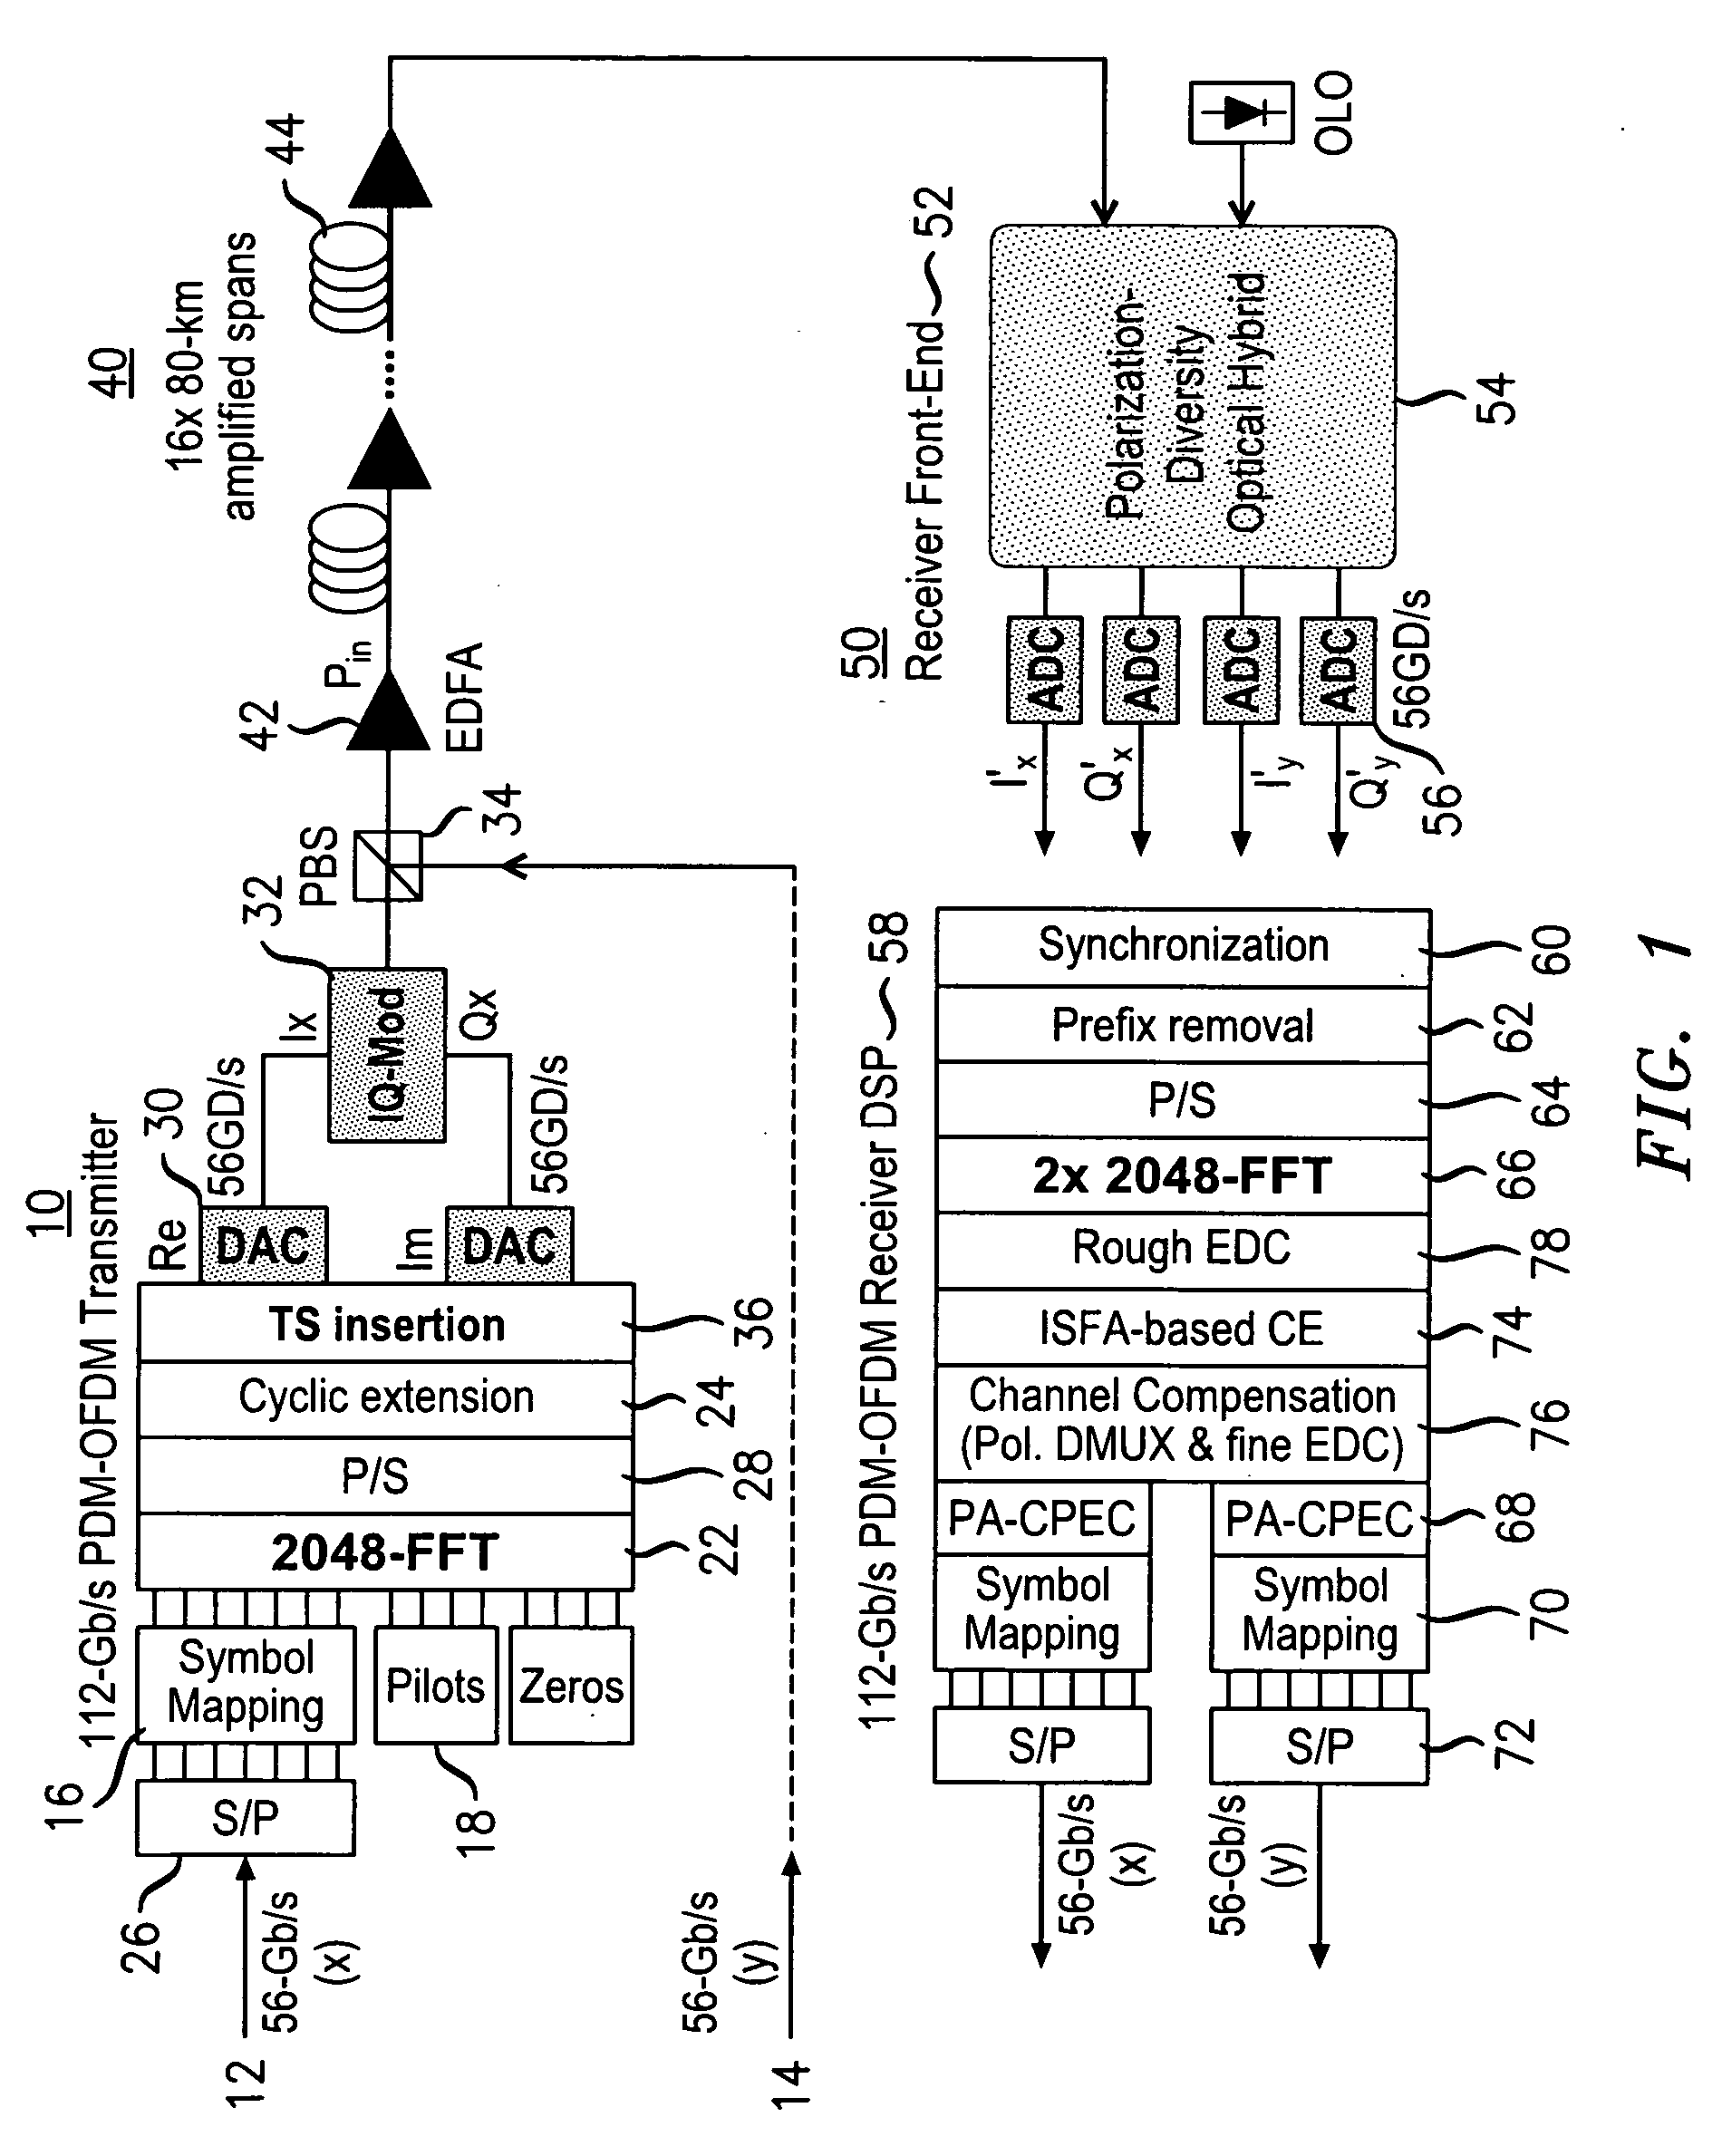 System, method and apparatus for channel estimation with dual polarization training symbols for coherent optical OFDM